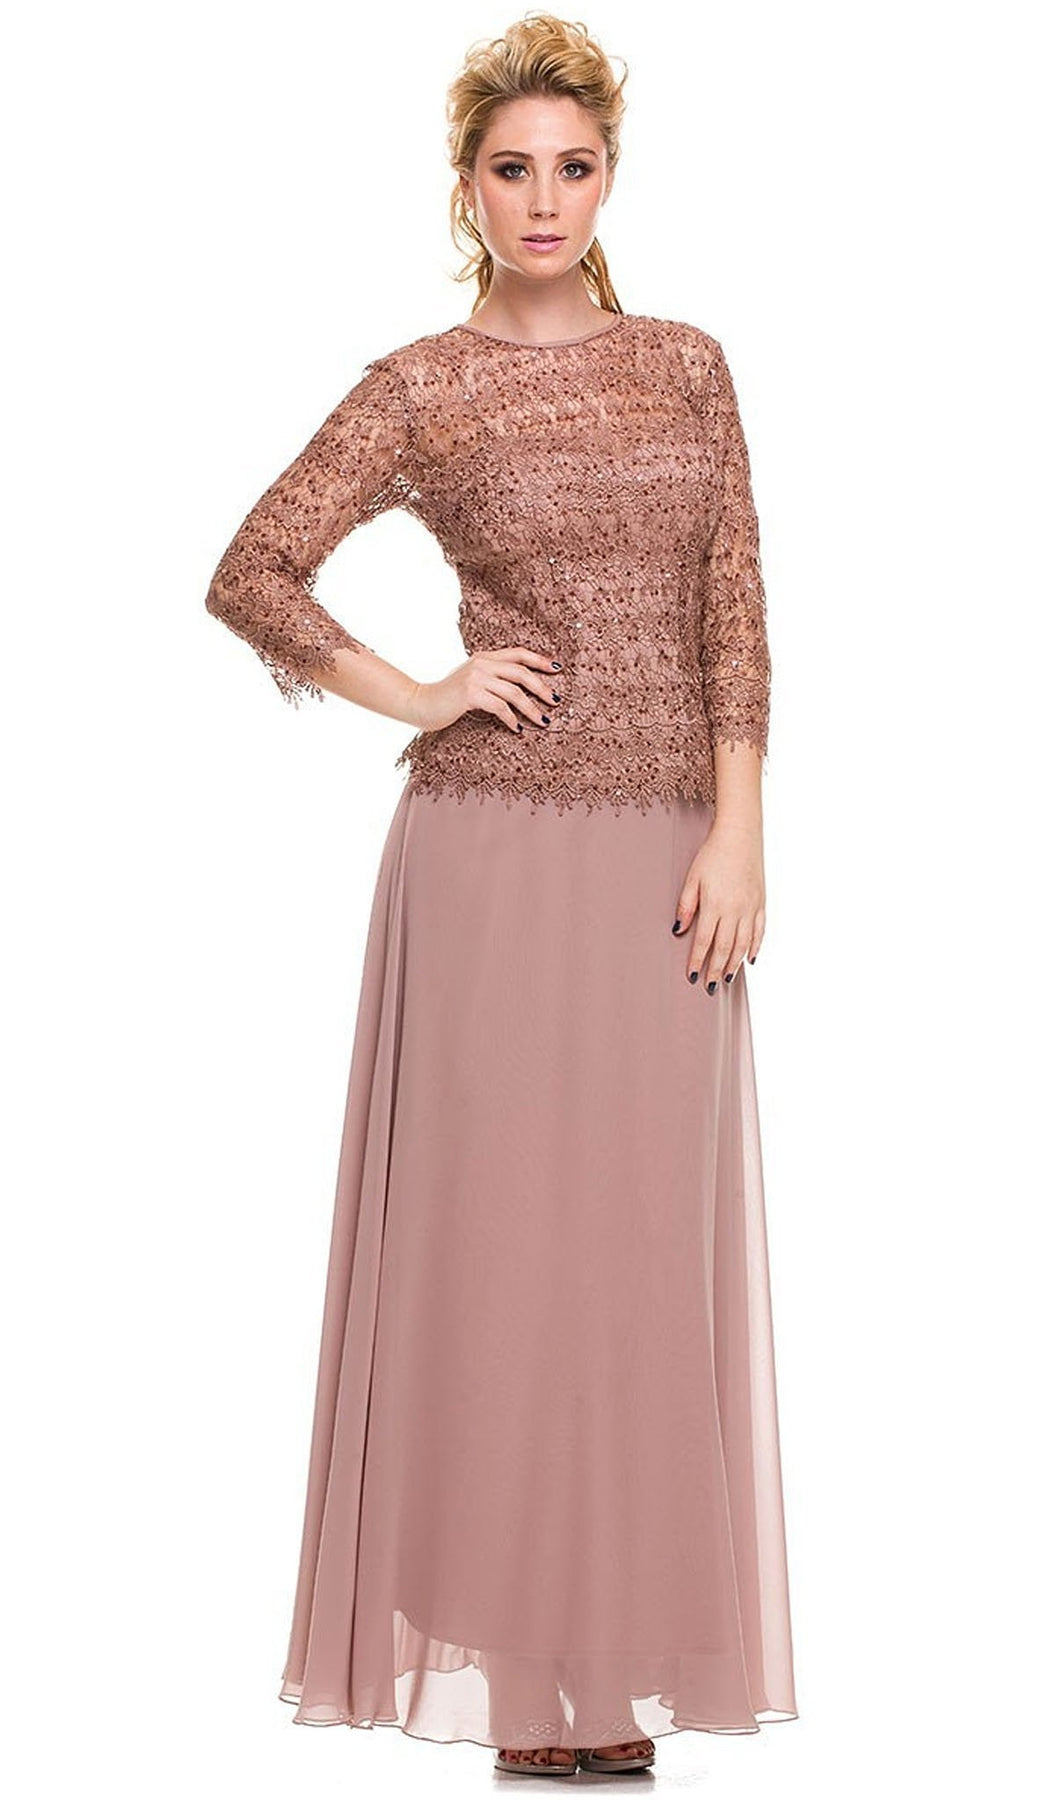 Nox Anabel - 5083 Quarter Sleeves Lace Overlay Top Long Formal Dress Special Occasion Dress M / Blush Tan